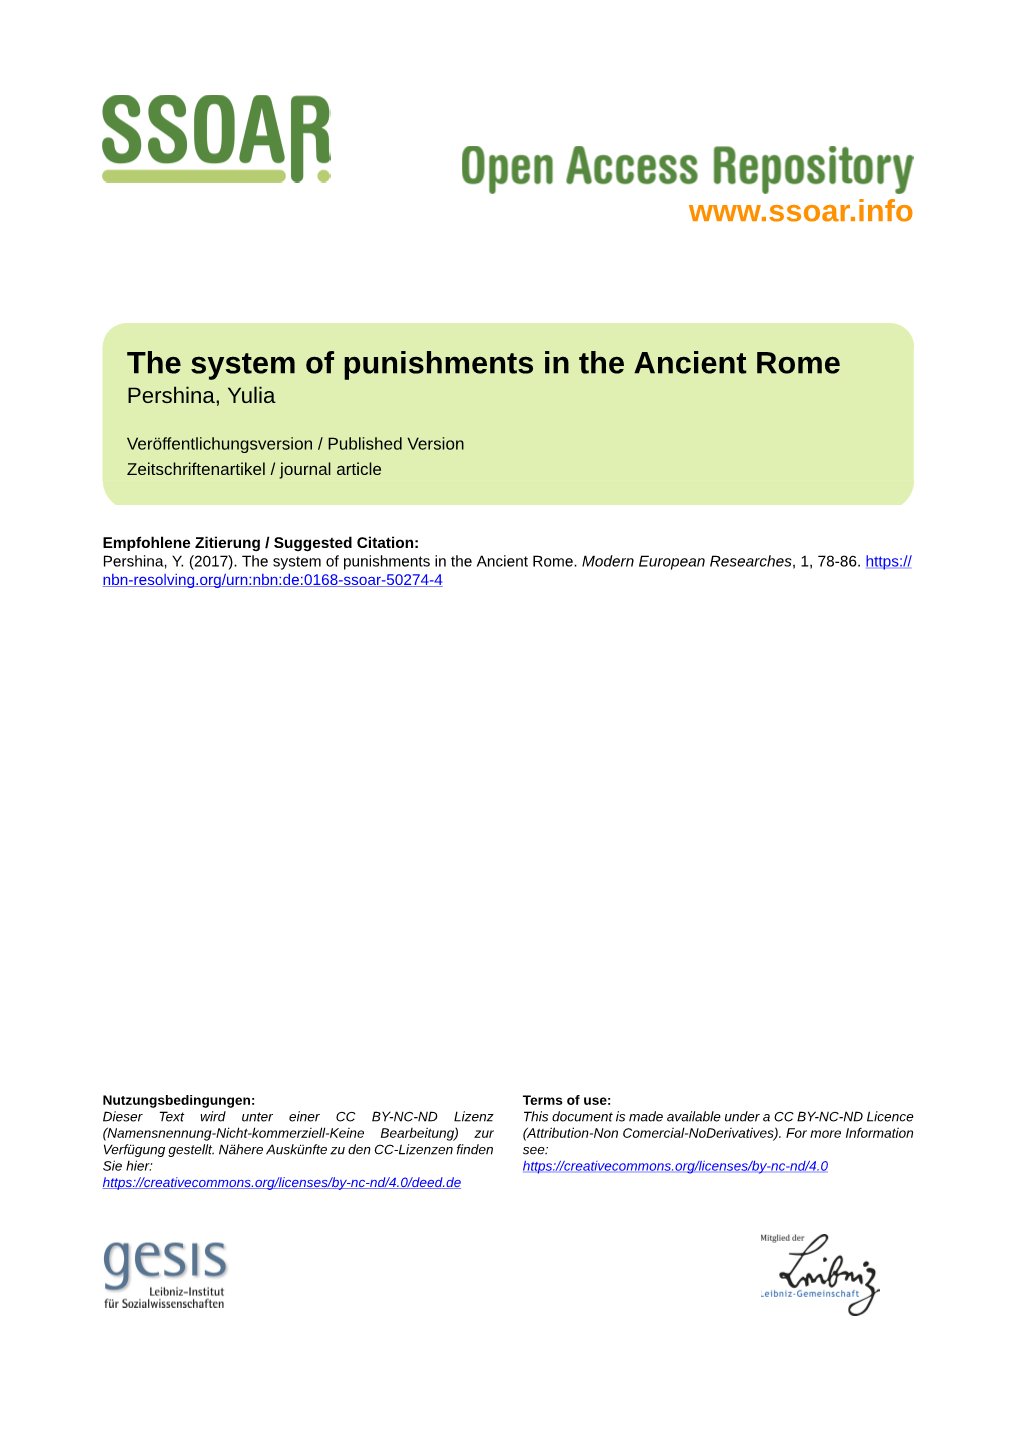 The System of Punishments in the Ancient Rome